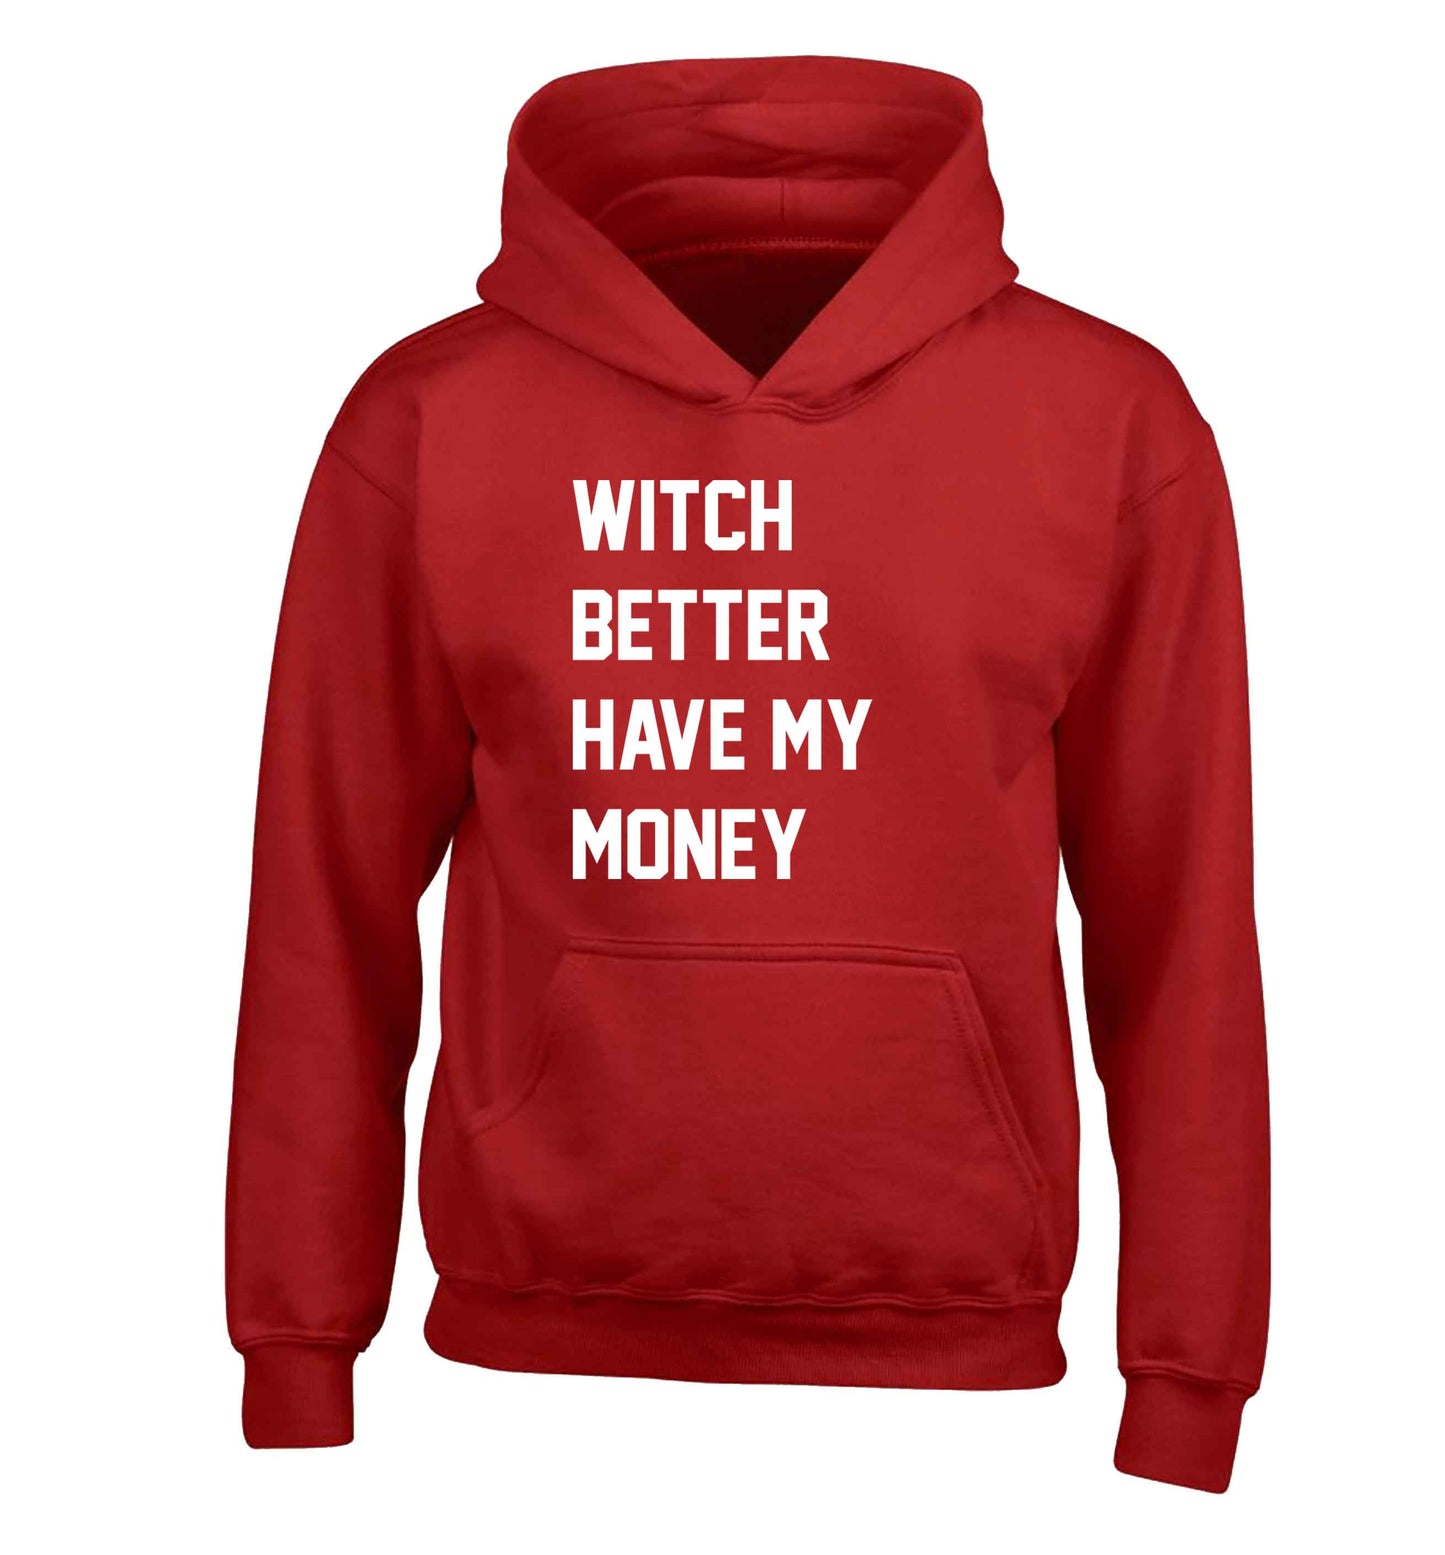 Witch better have my money children's red hoodie 12-13 Years